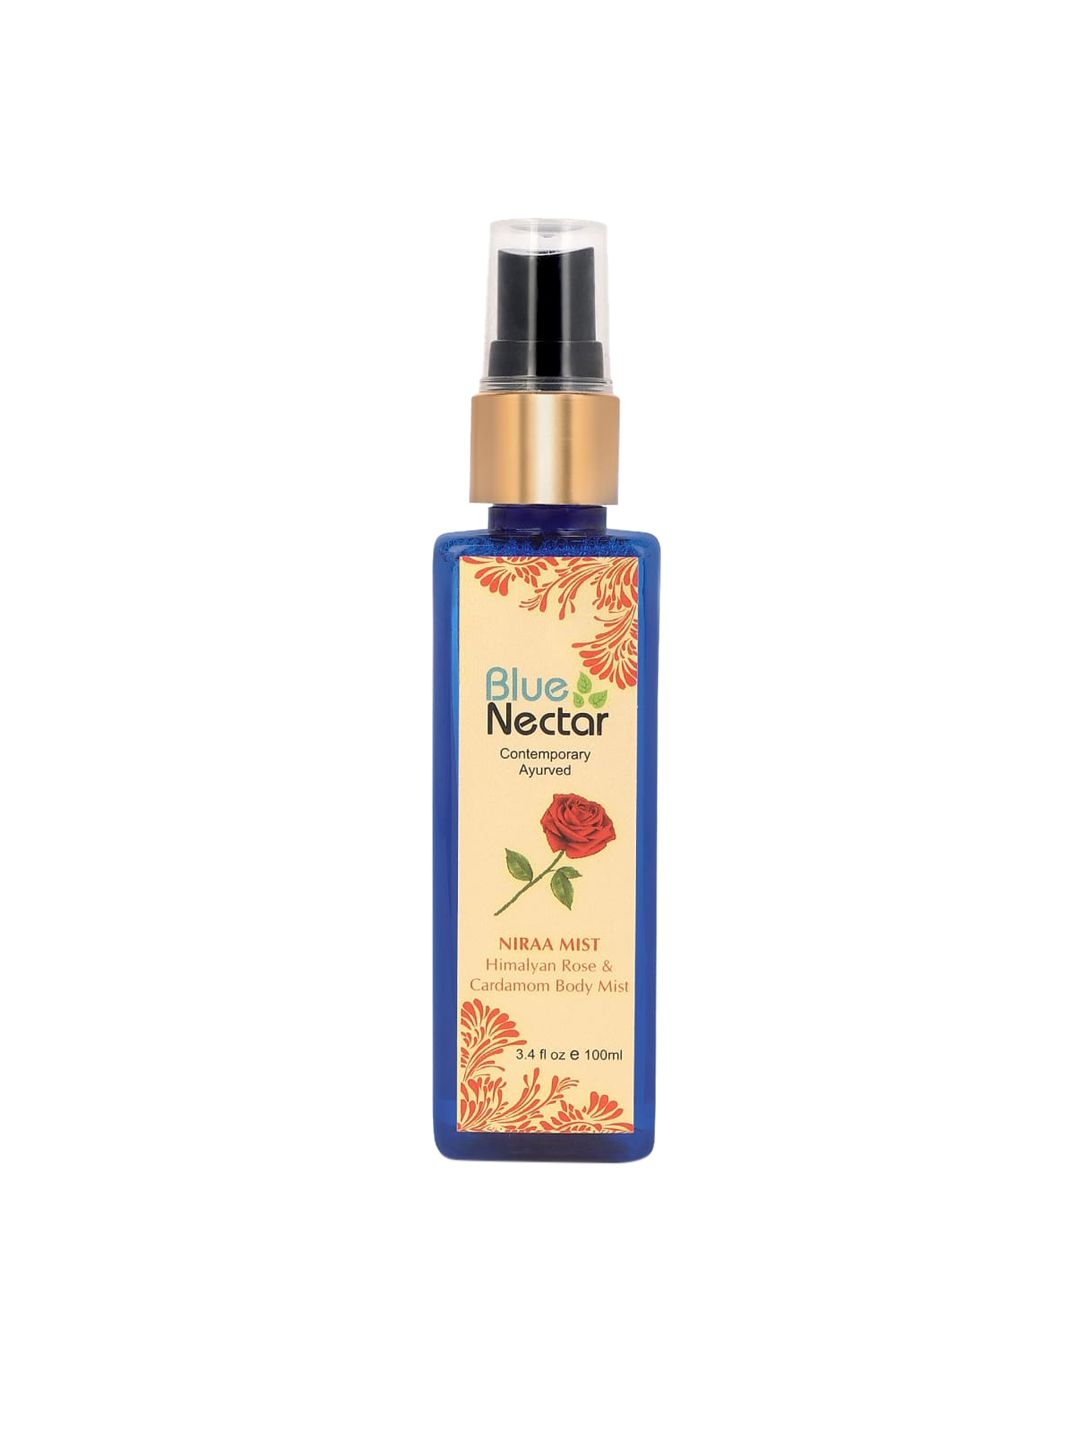 Blue Nectar Uplifting Body Mist with Himalayan Rose & Cardamom for Freshness - 100 ml Price in India